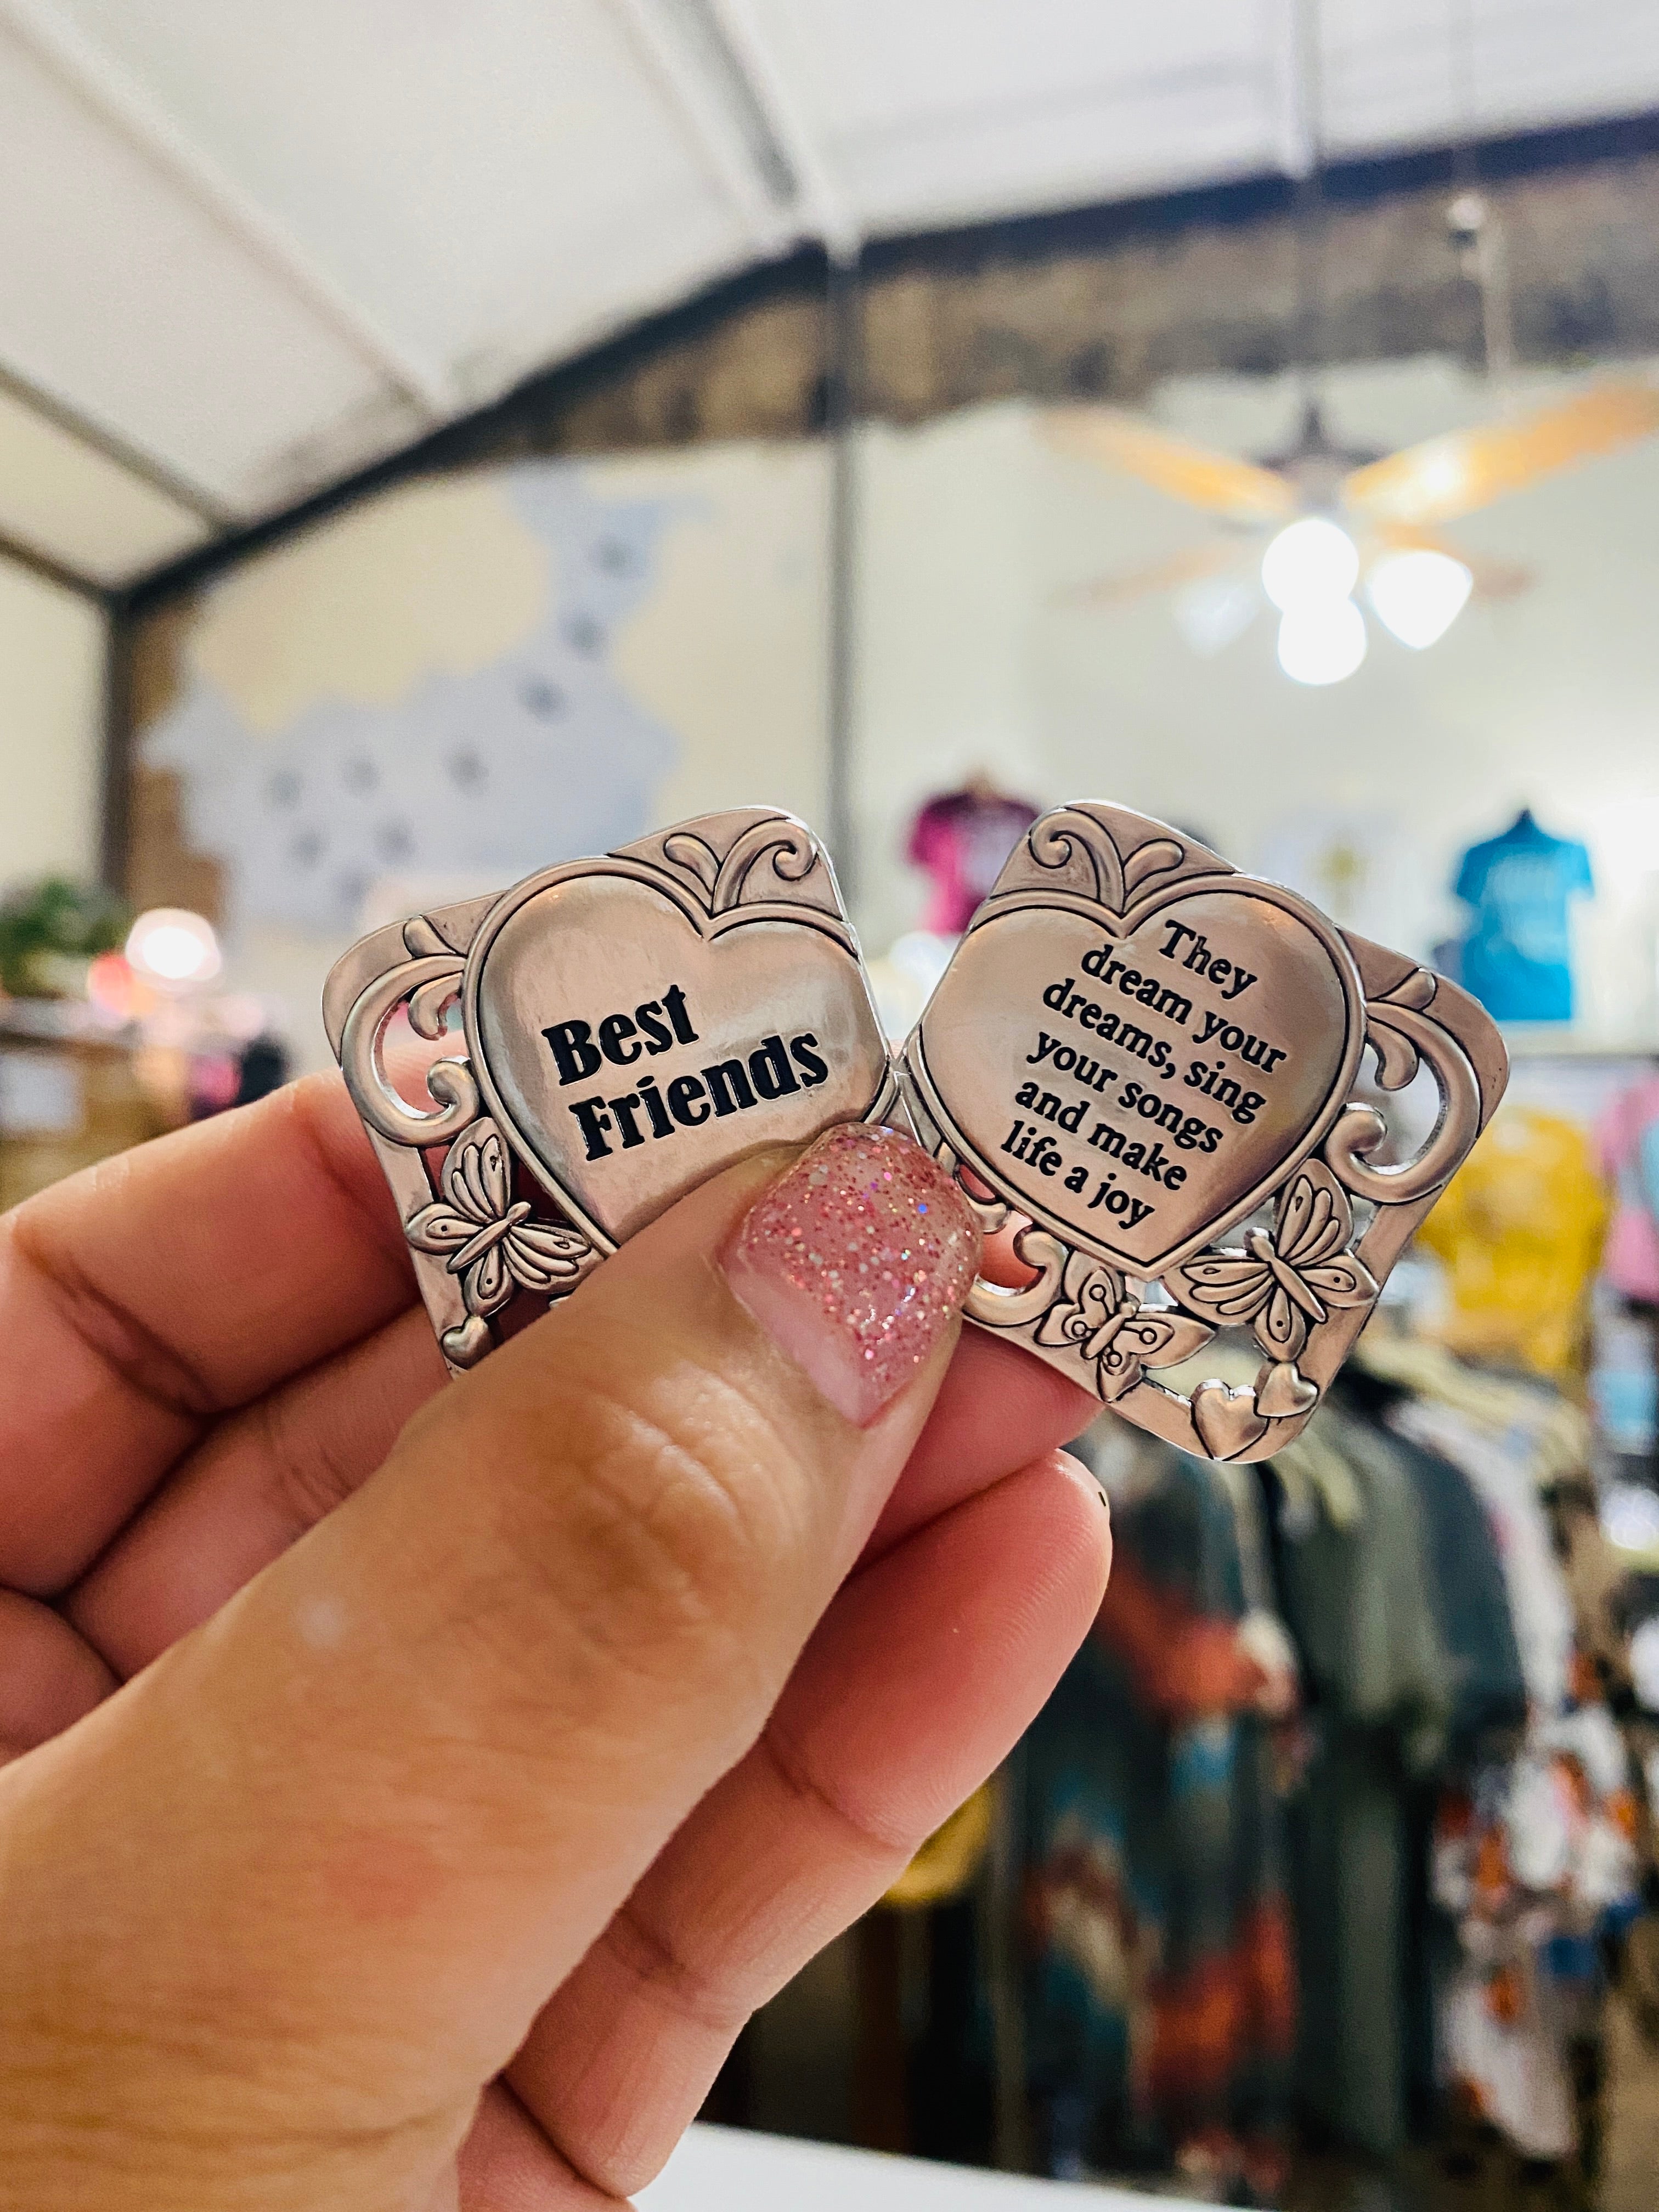 Special Message Tokens Pocket Charms